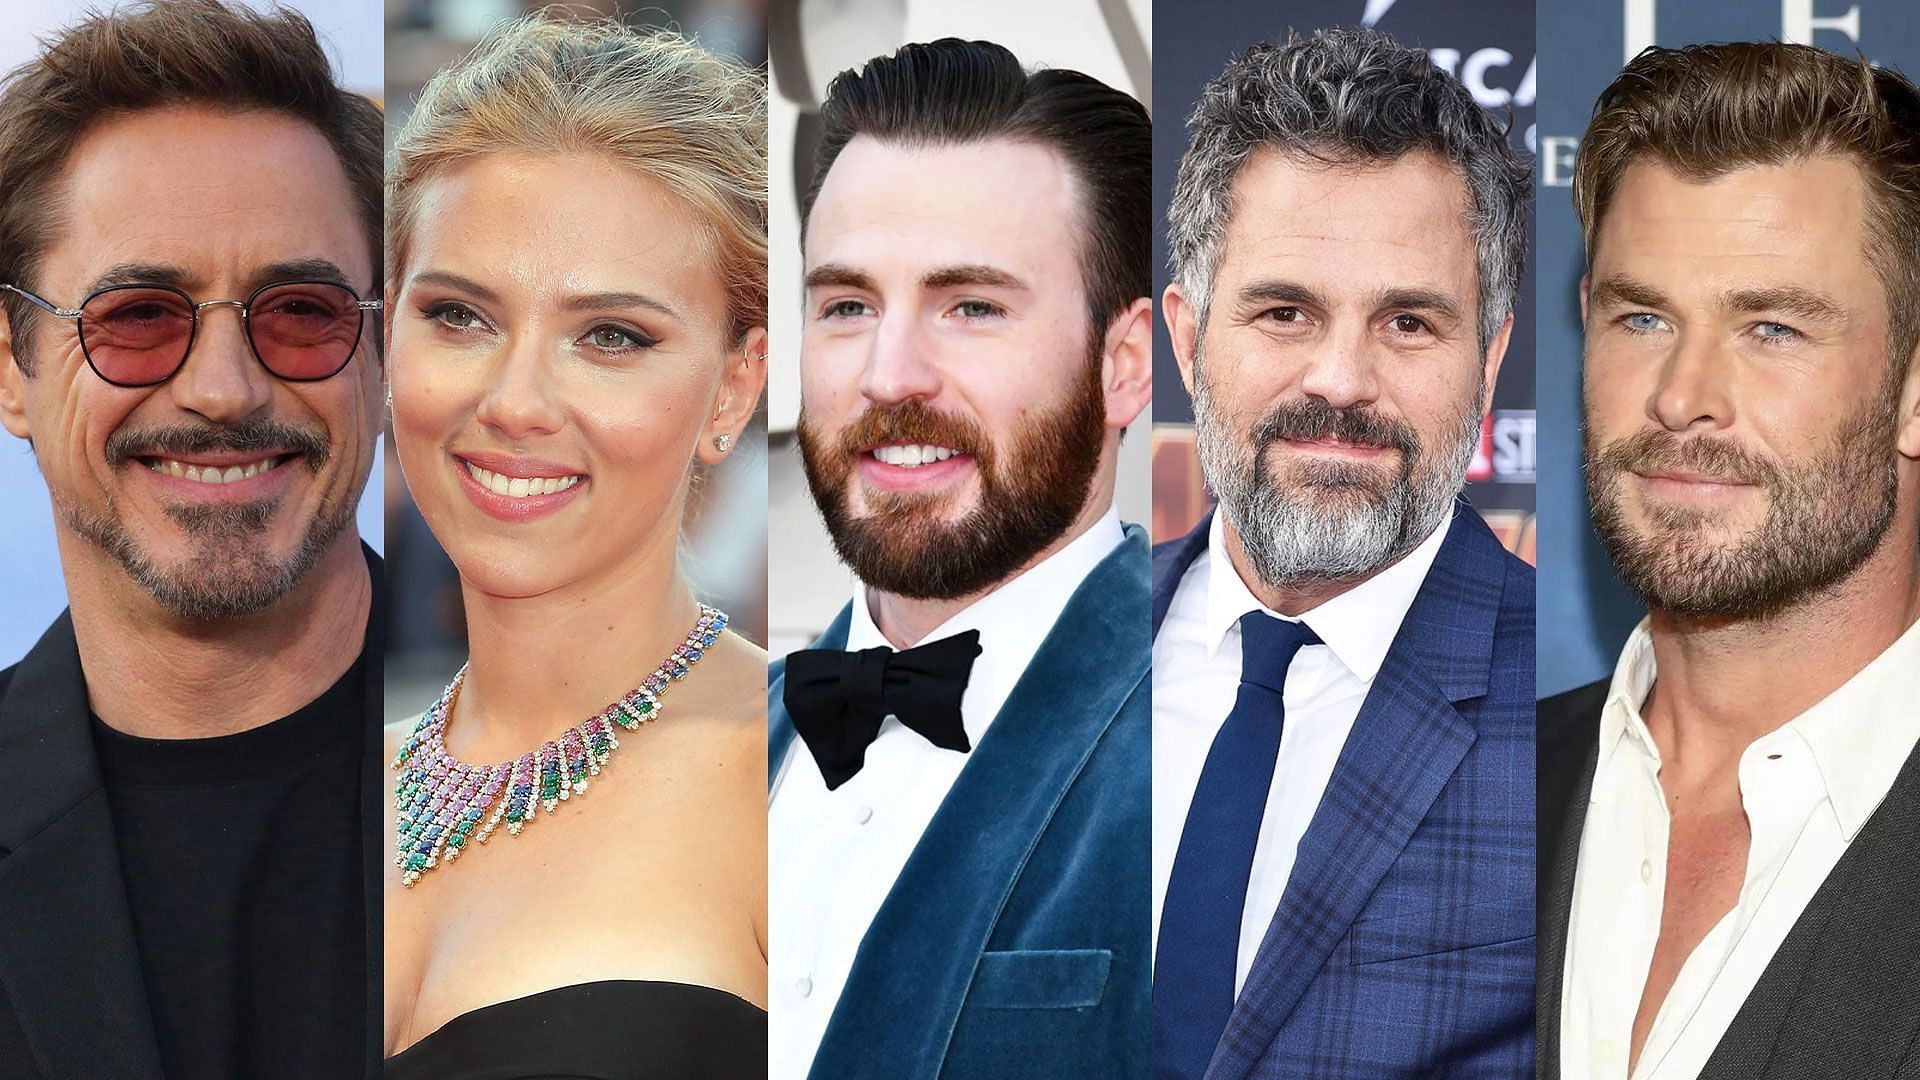 Did the Avengers: Endgame lead cast deliver hits outside of MCU after phase  3 ended?